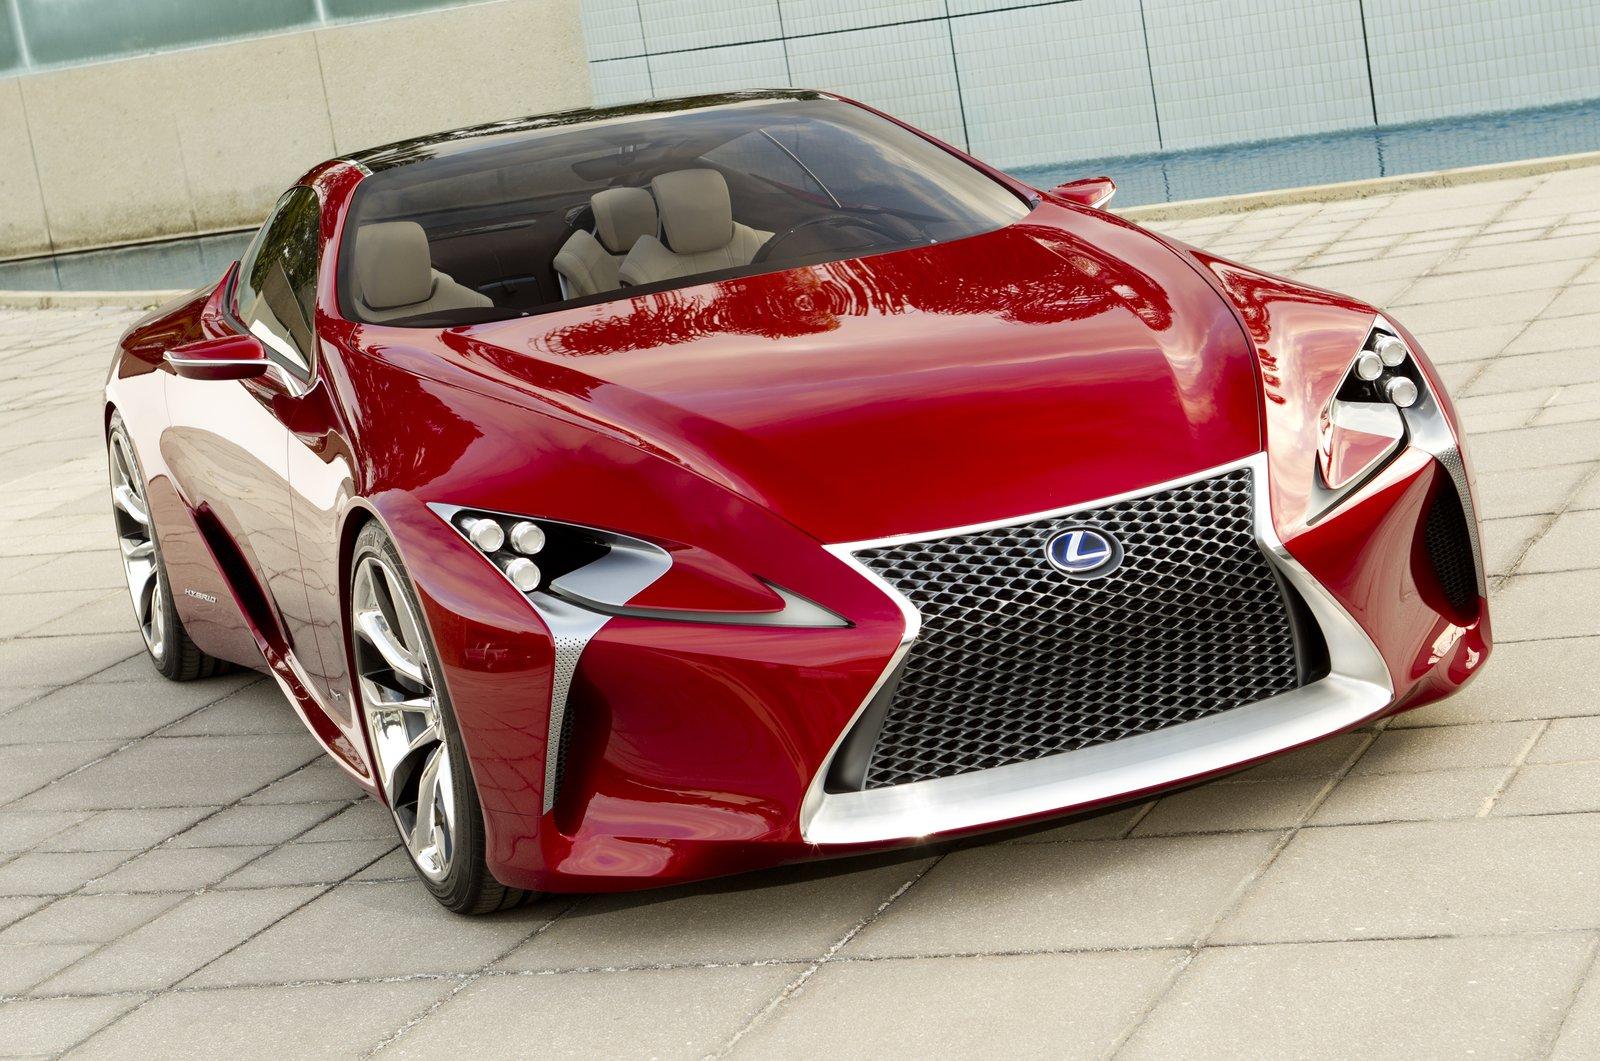 Lf Lc Concept Could Be The Successor To The Lexus Lfa